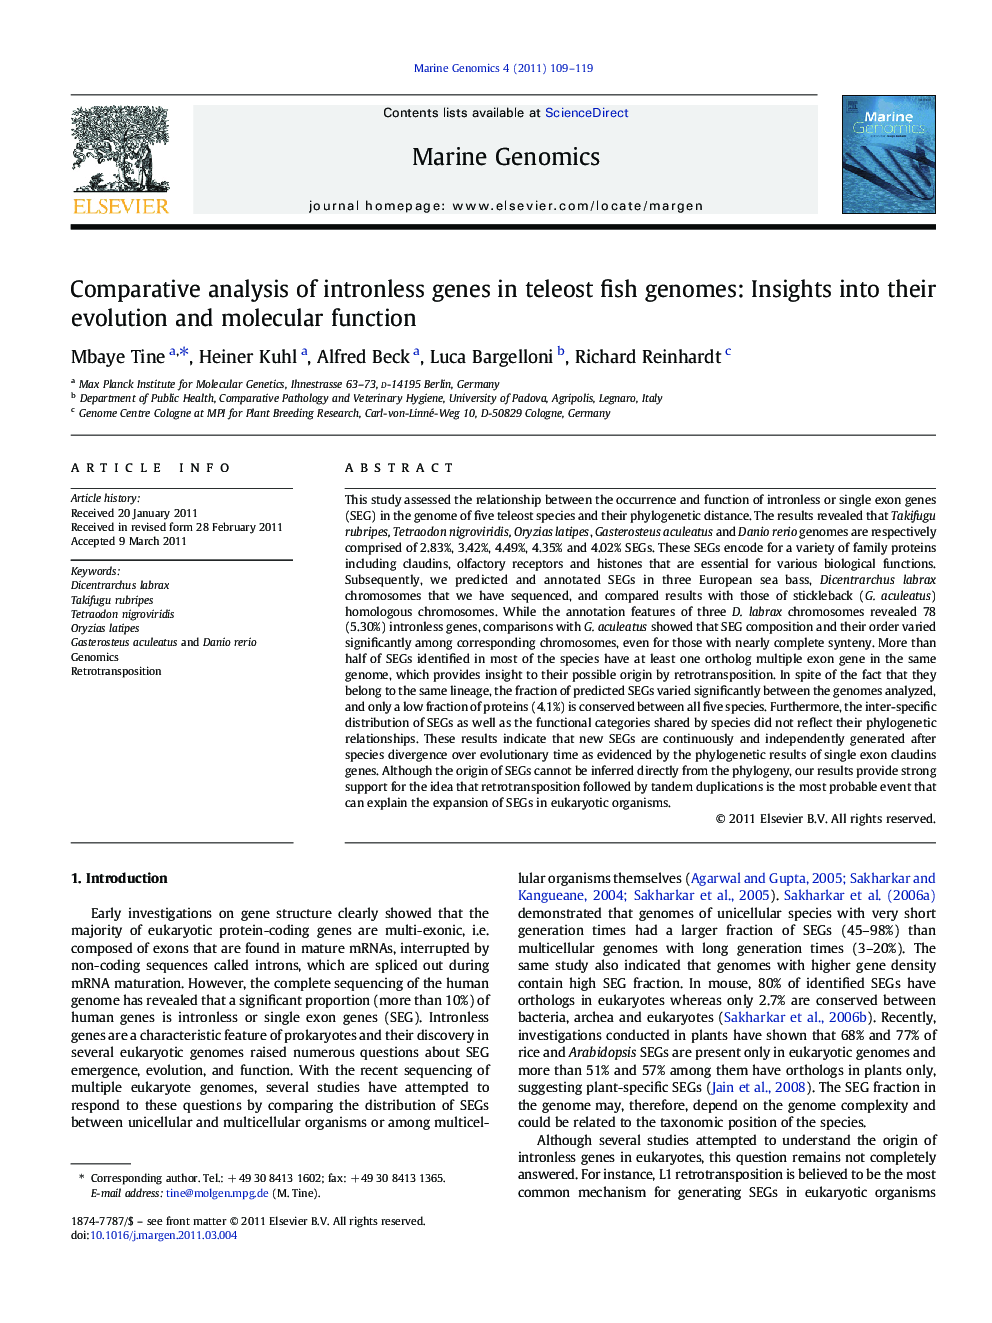 Comparative analysis of intronless genes in teleost fish genomes: Insights into their evolution and molecular function